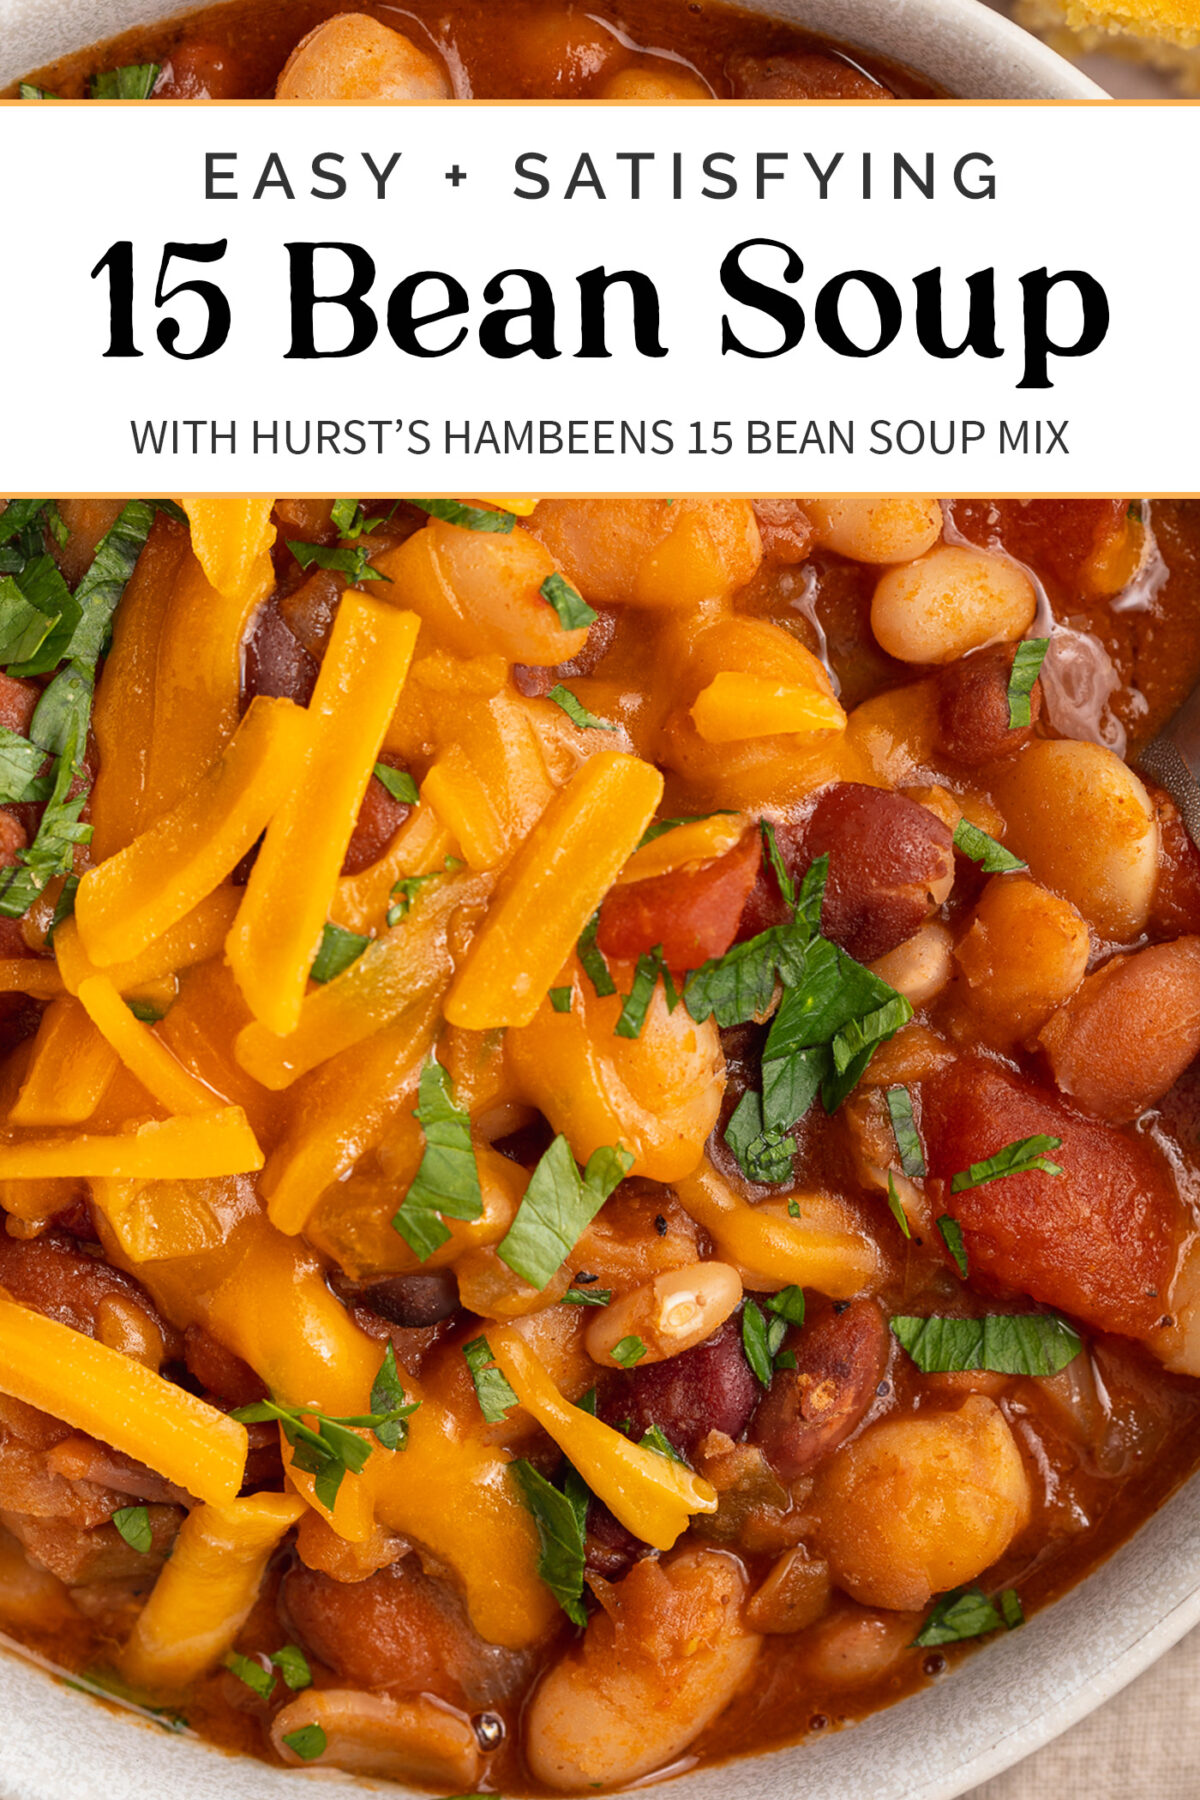 Pin graphic for 15 Bean Soup.